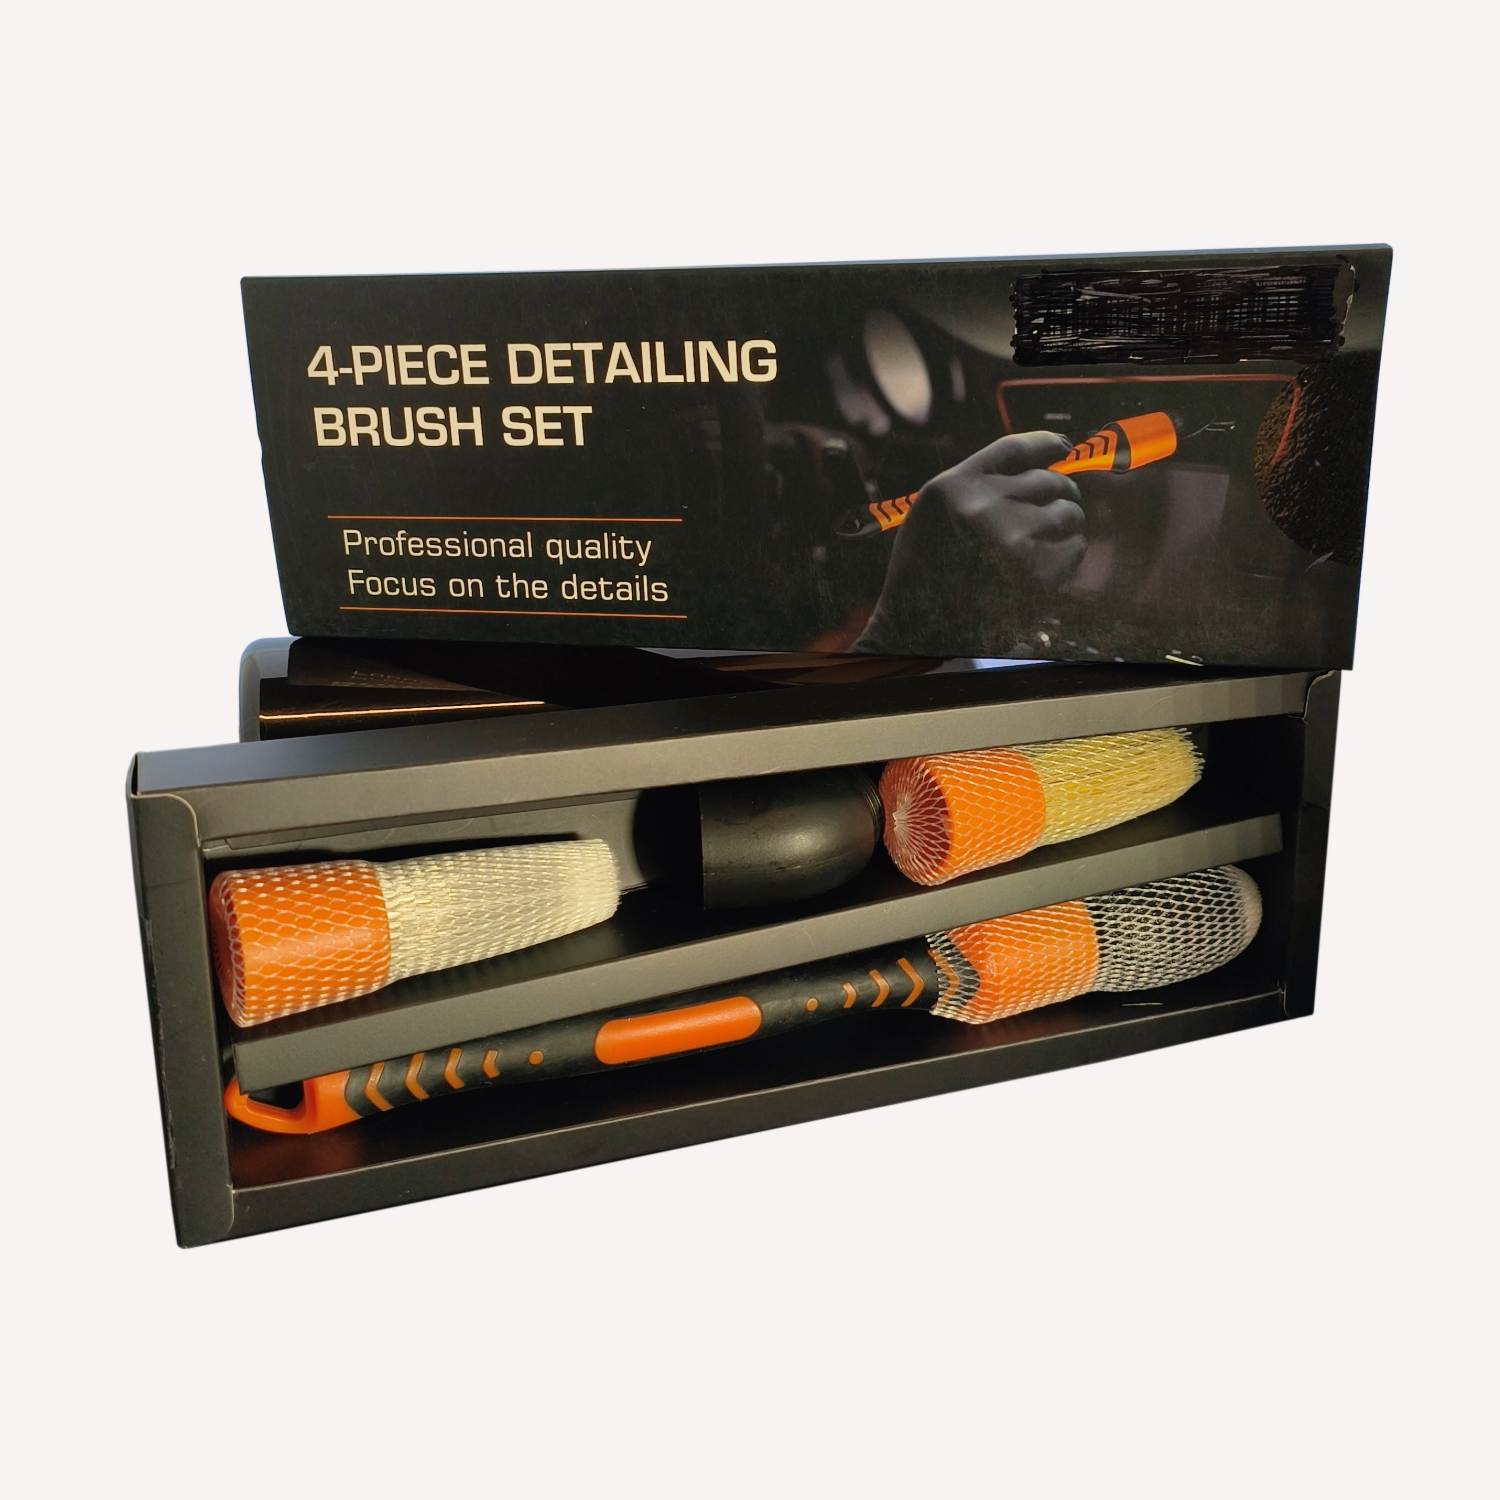 Detailing brush set in black packaging with orange features.